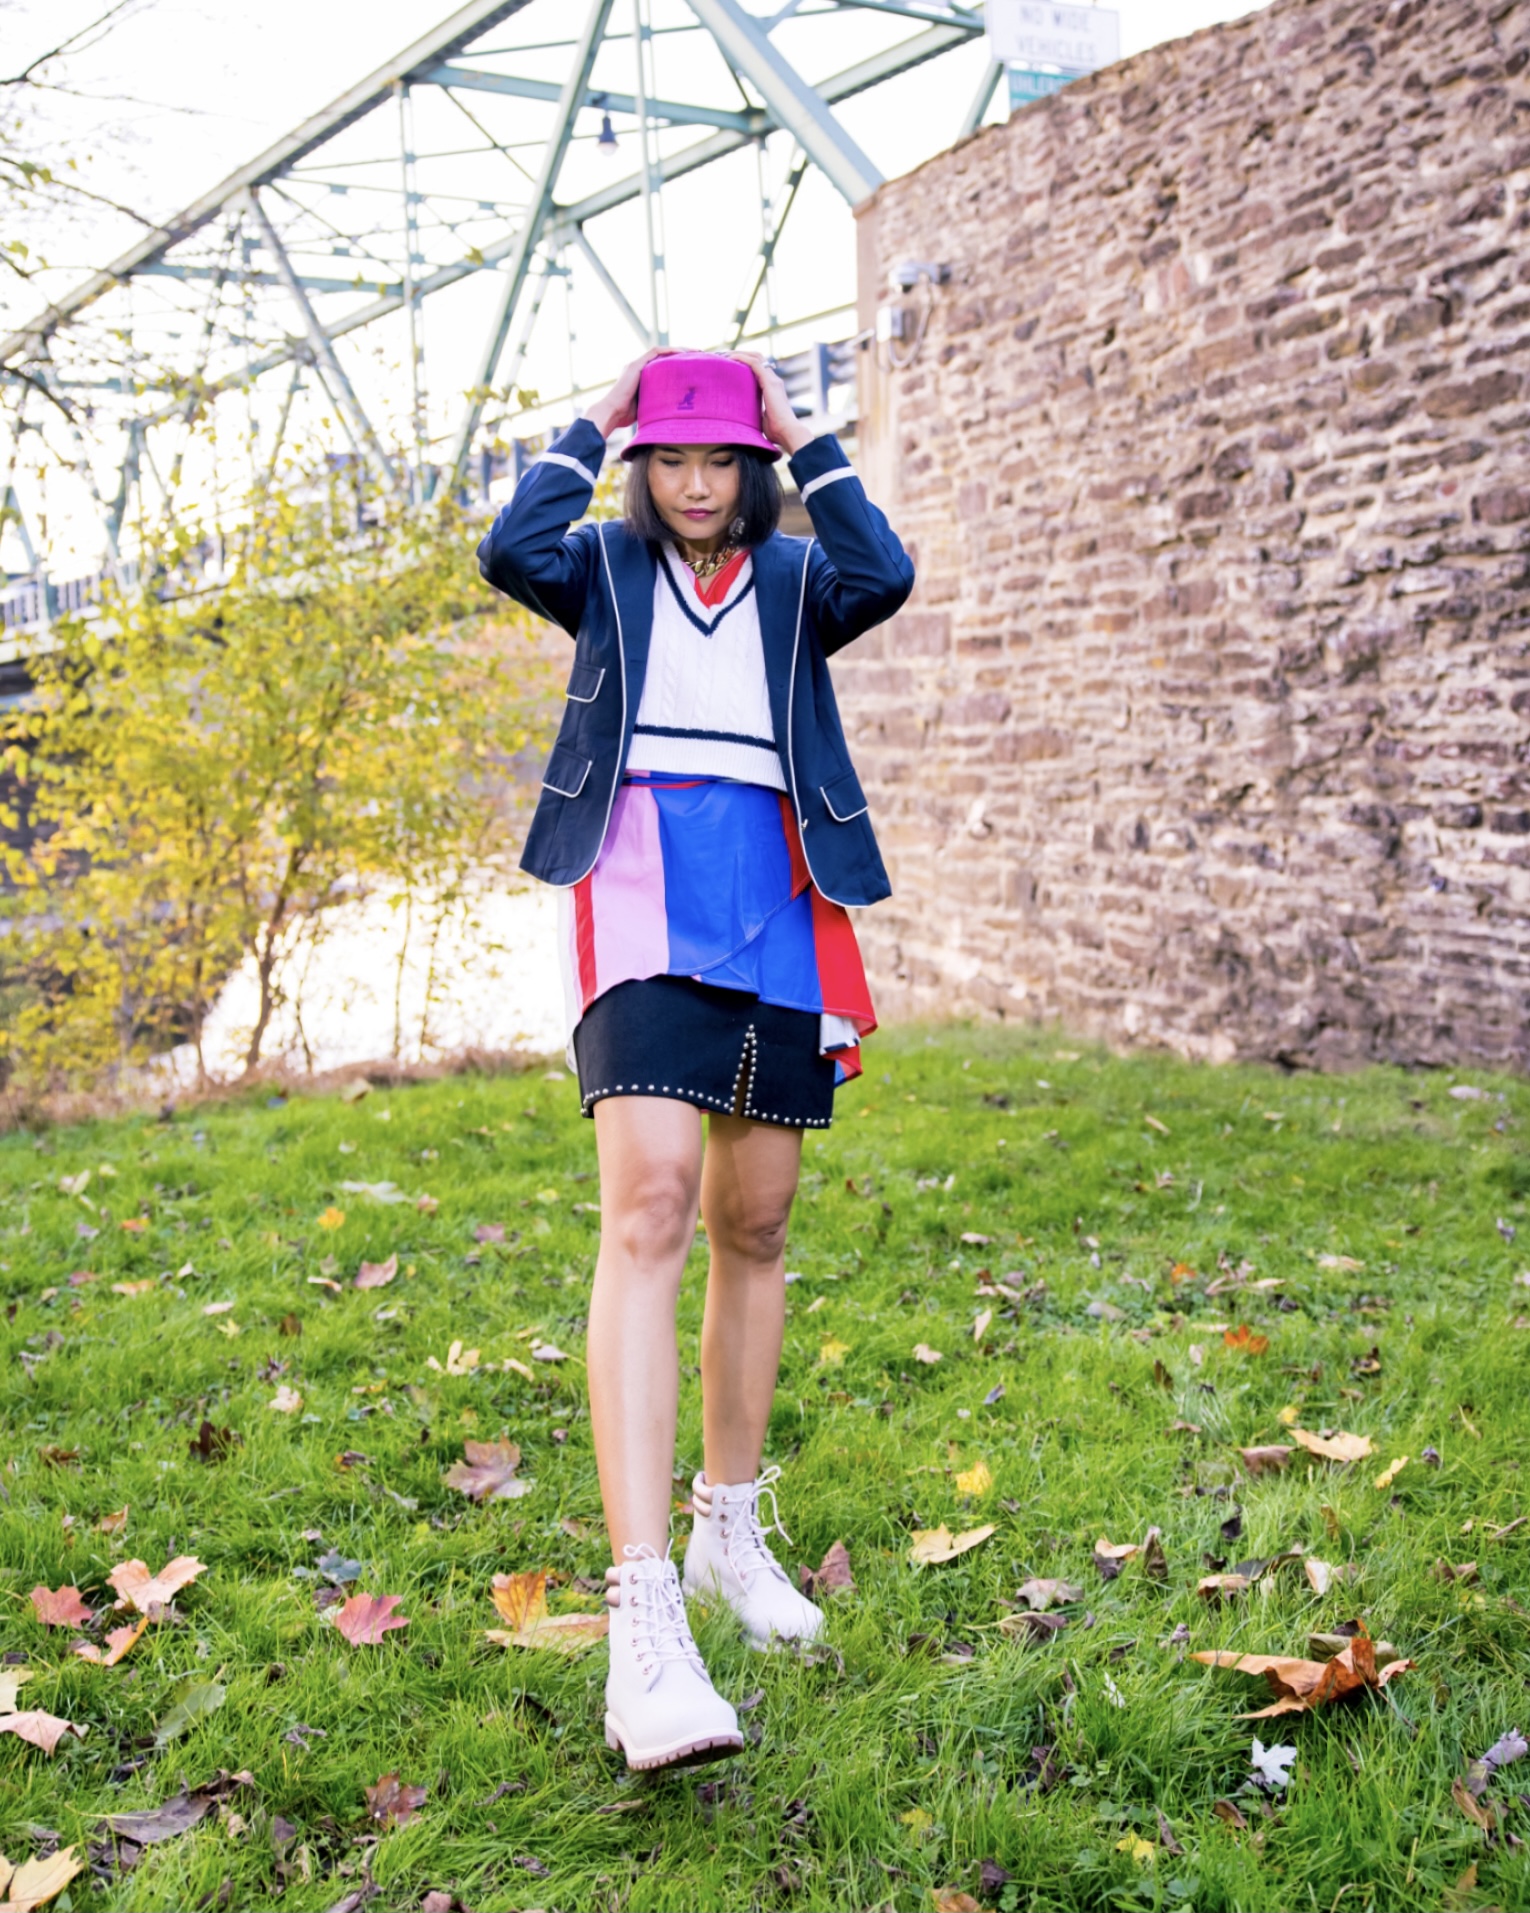 emily in paris outfit inspired for less by nanphanita jacob is wearing colorful layered outfit and kangal pink bucket hat